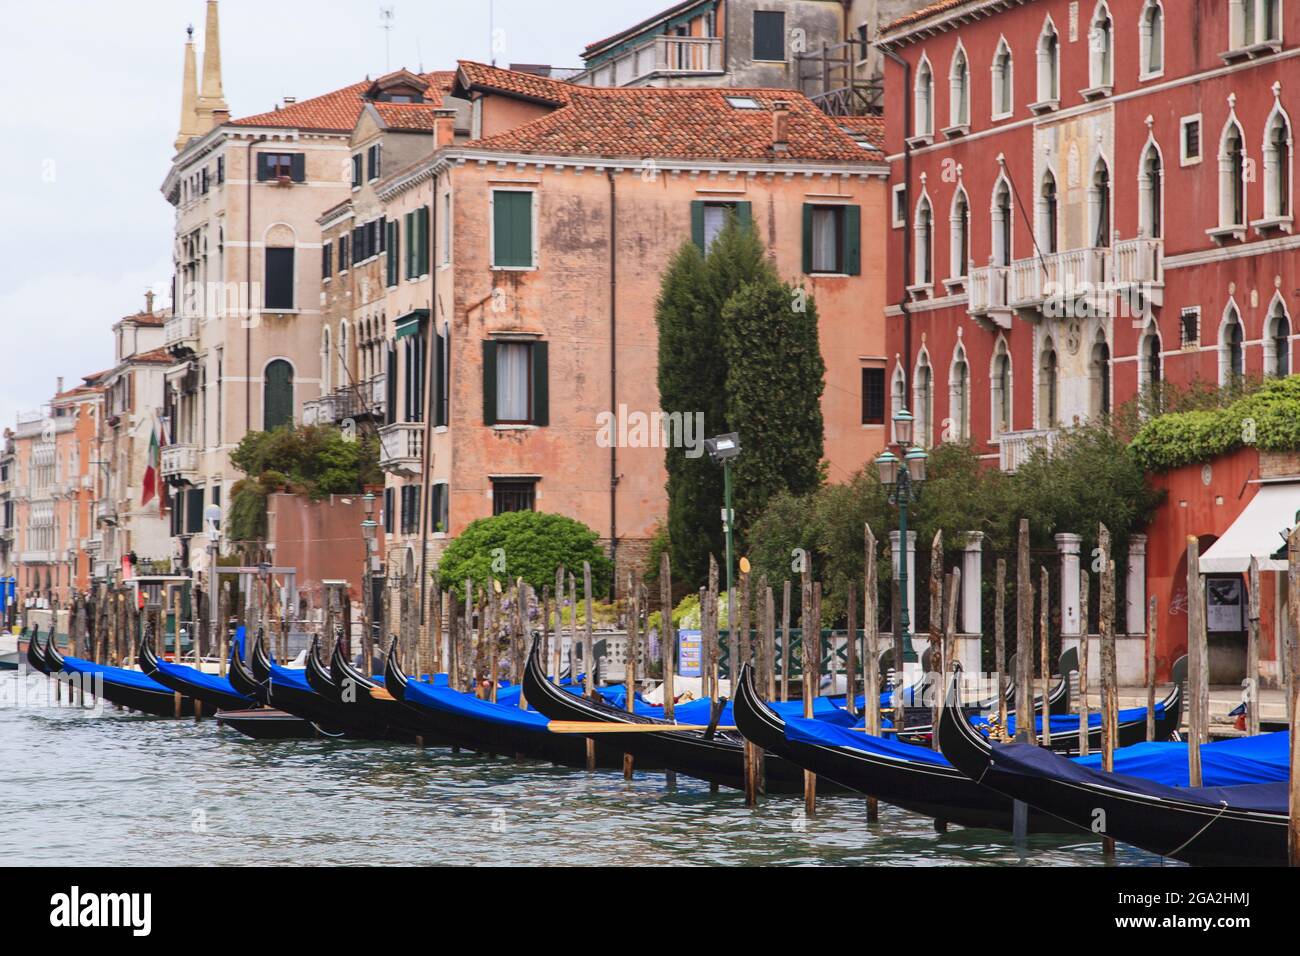 Covered gondolas moored along the canal in front of old stone buildings; Venice, Venezia, Italy Stock Photo